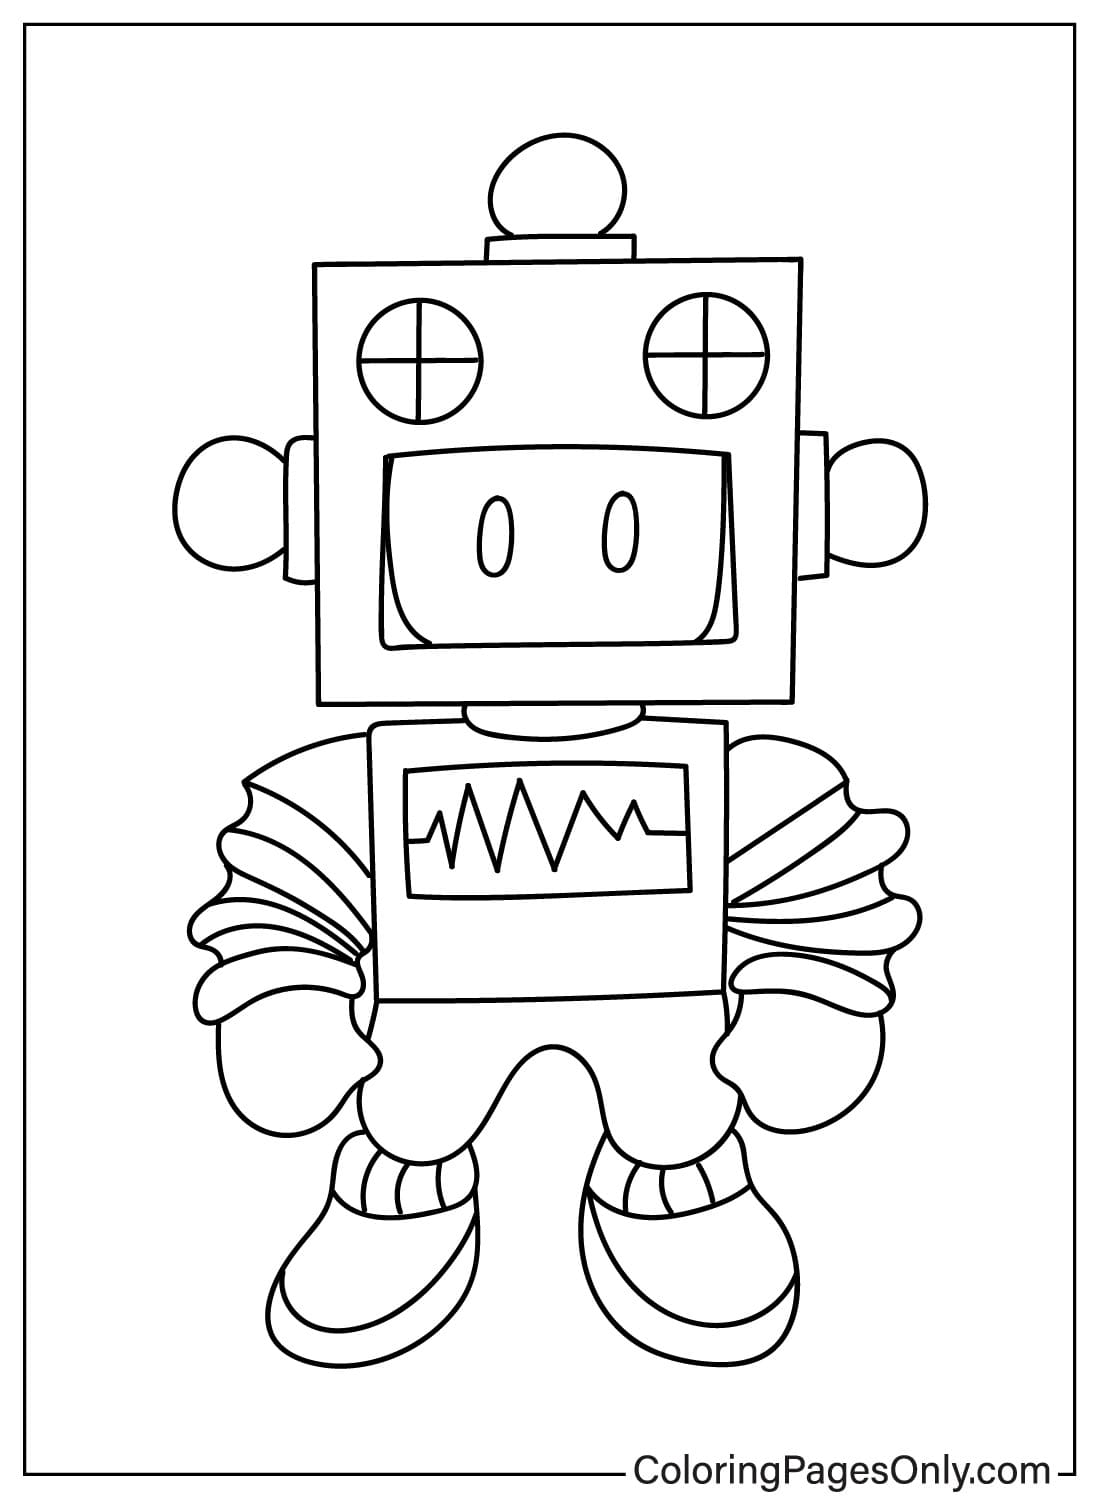 Stumble Guys Coloring Page to Print from Stumble Guys